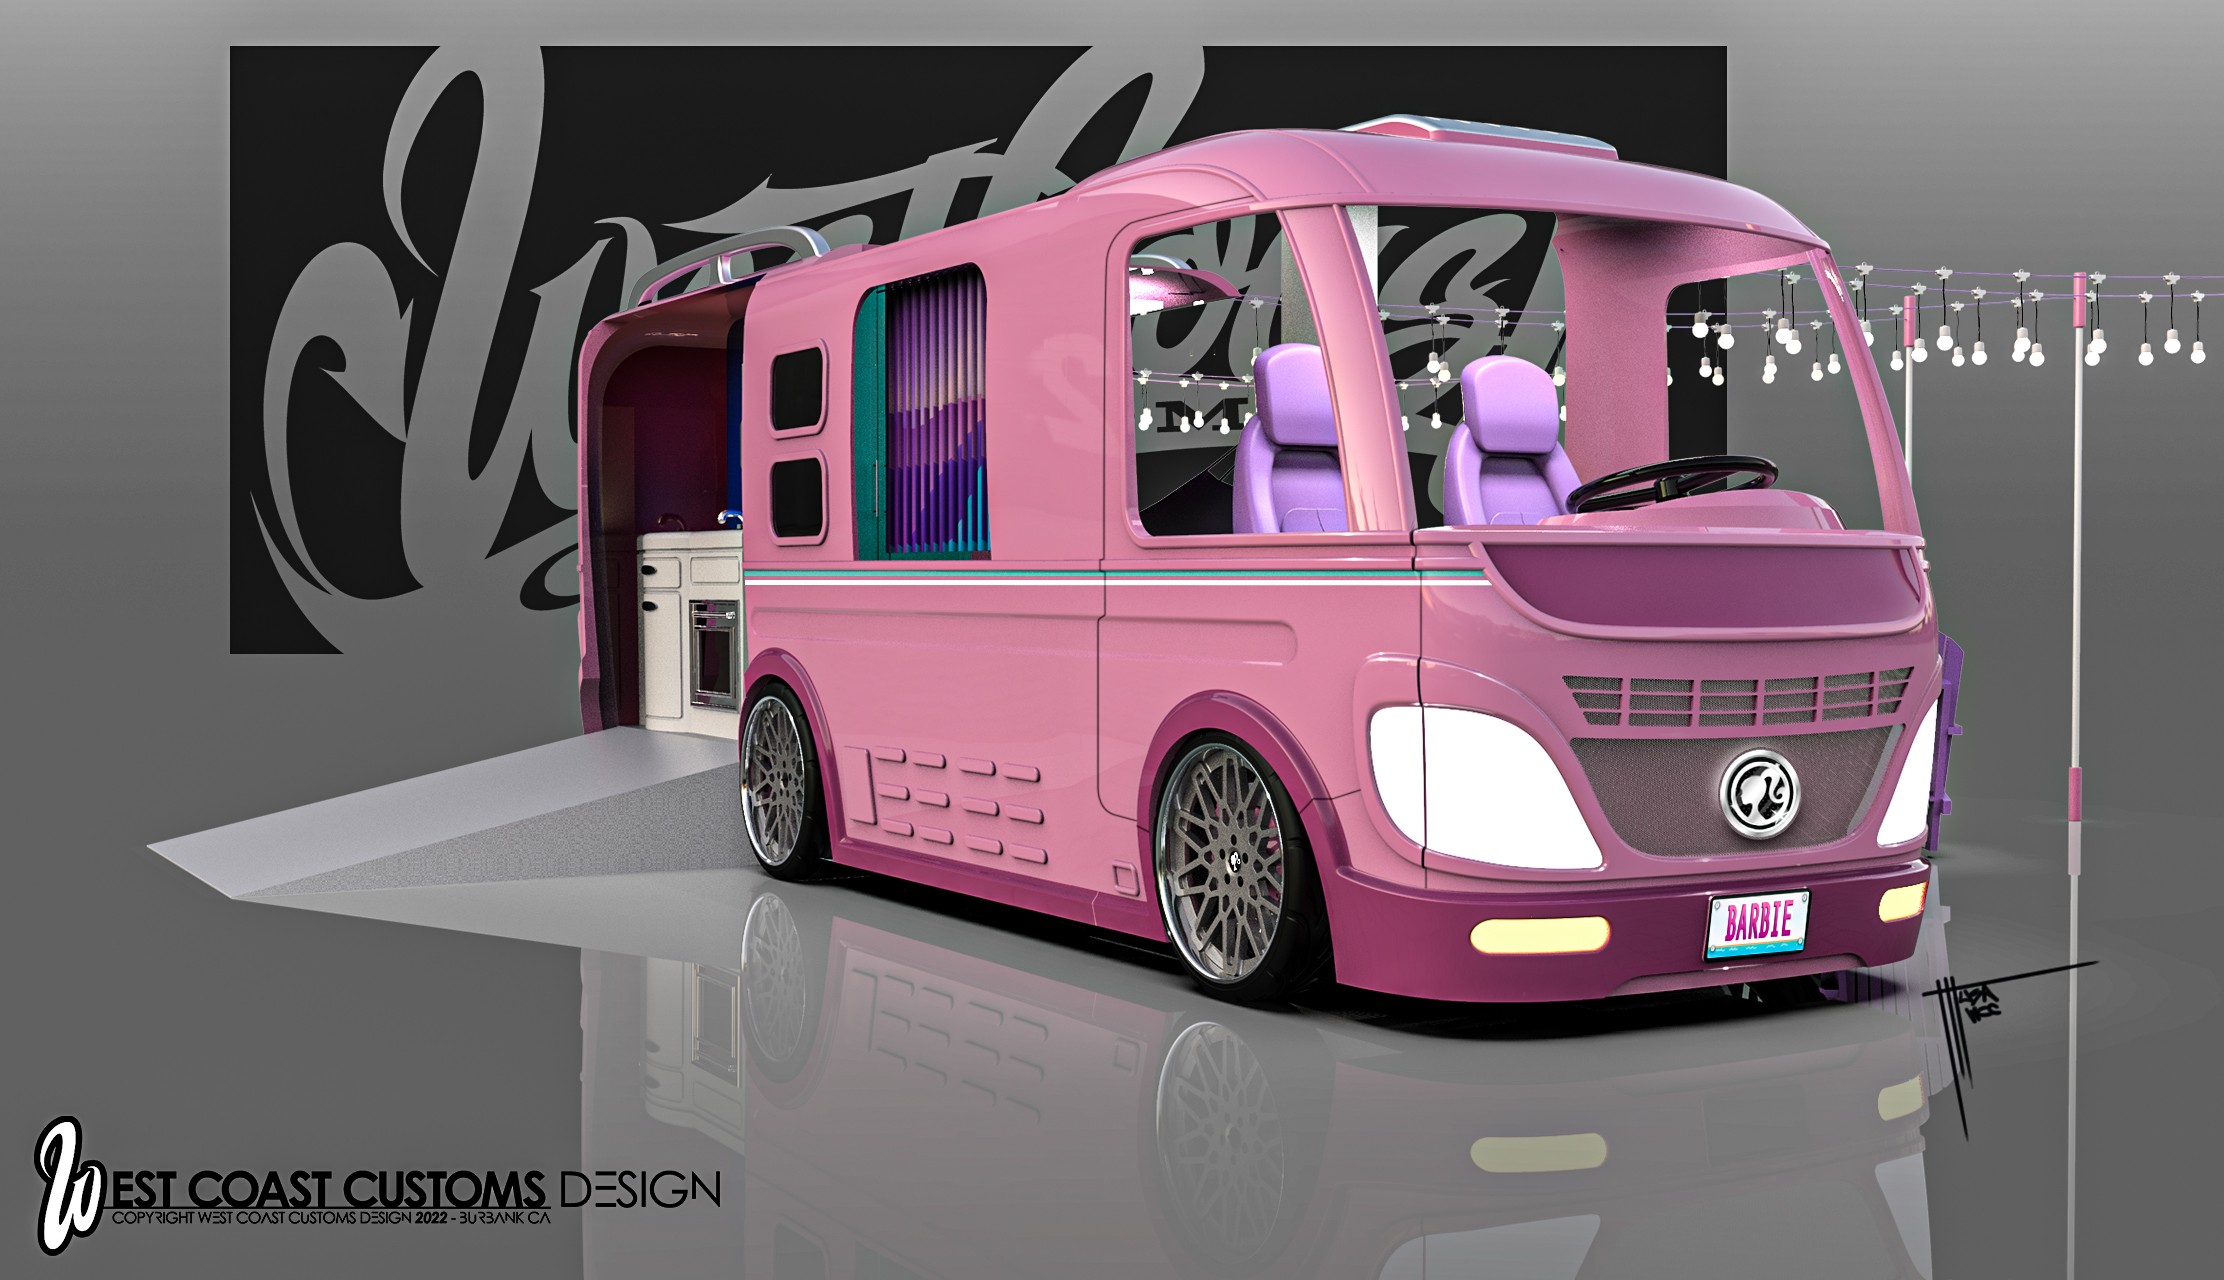 Barbie's DreamCamper Is Now Very RV, Thanks to West Coast Customs - autoevolution